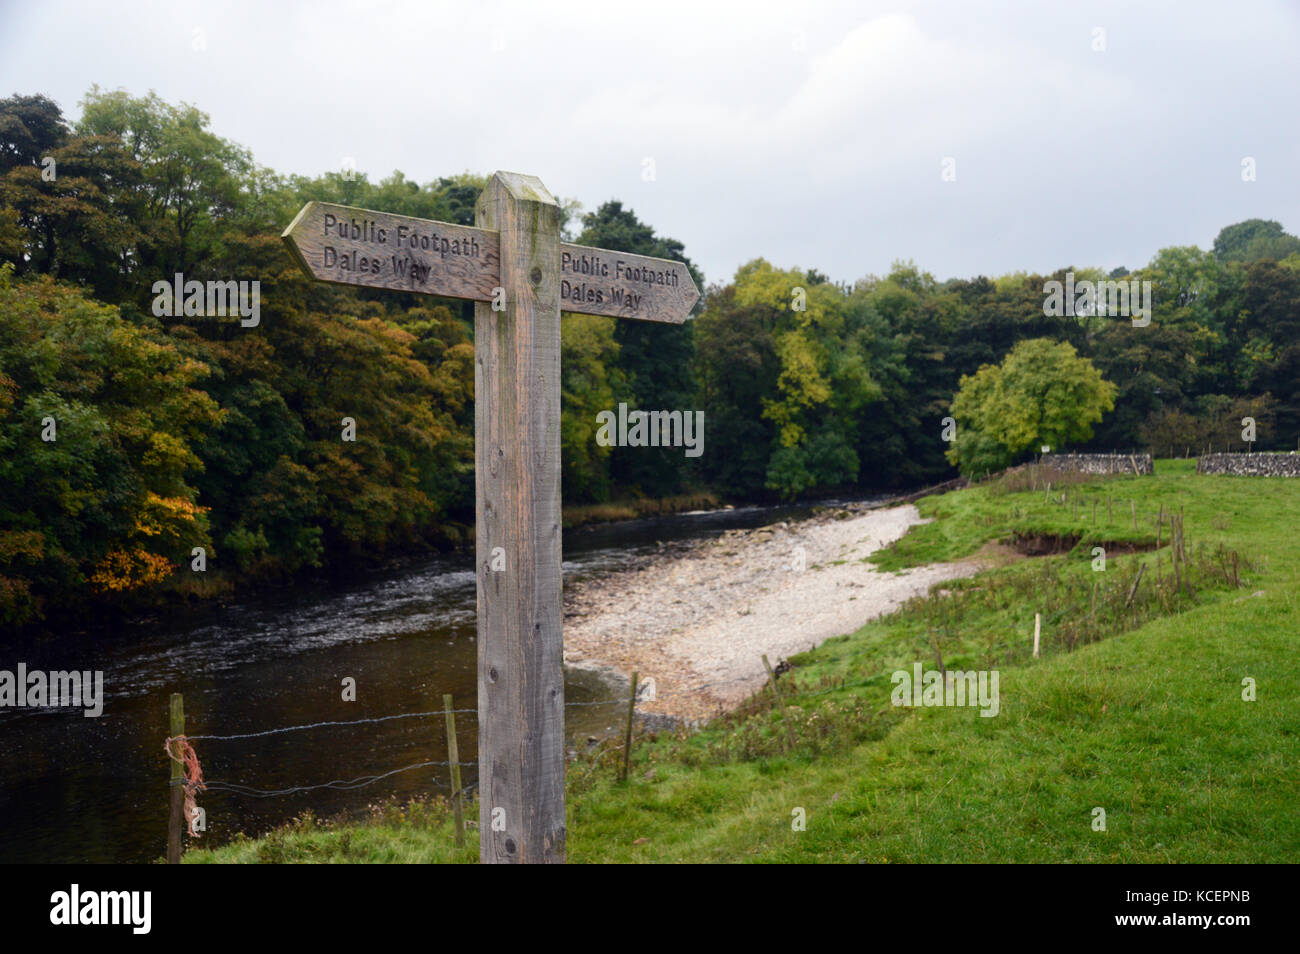 Wooden Signpost for the Dales Way Footpath Between Grassington & Burnsell in Wharfedale, Yorkshire Dales National Park, England, UK. Stock Photo